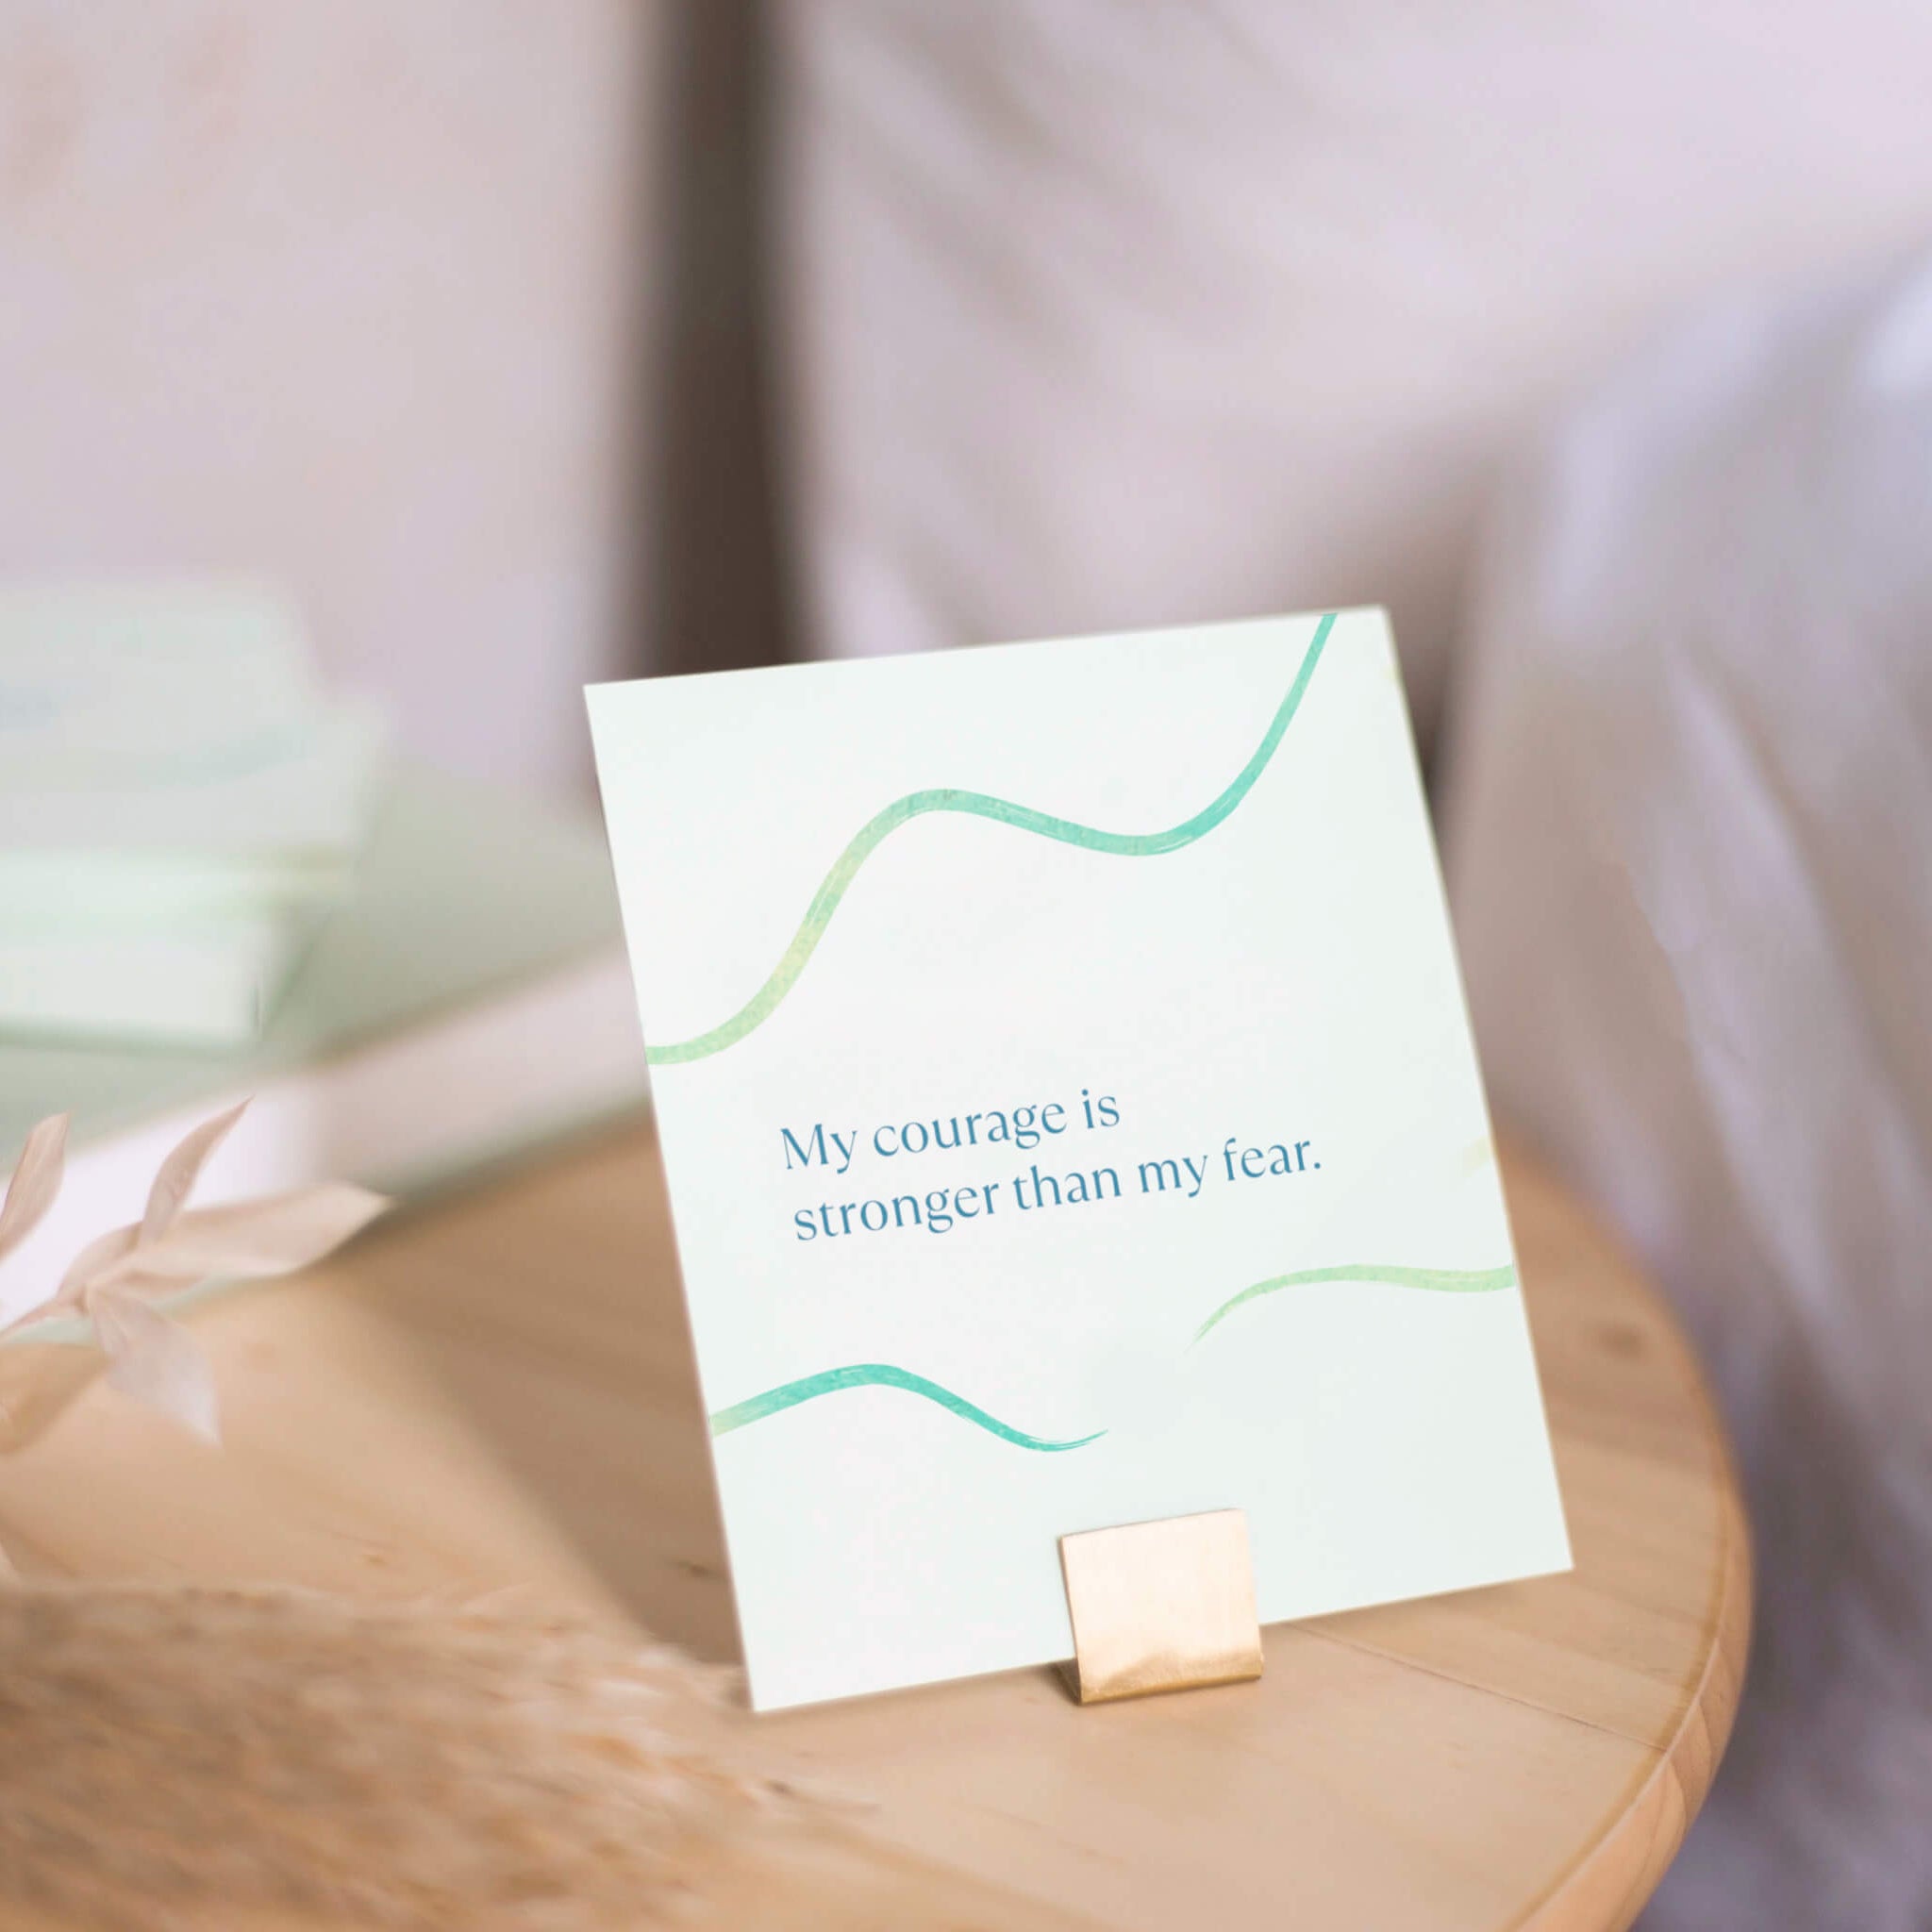 self-compassion affirmation card on stand for affirmation gift box